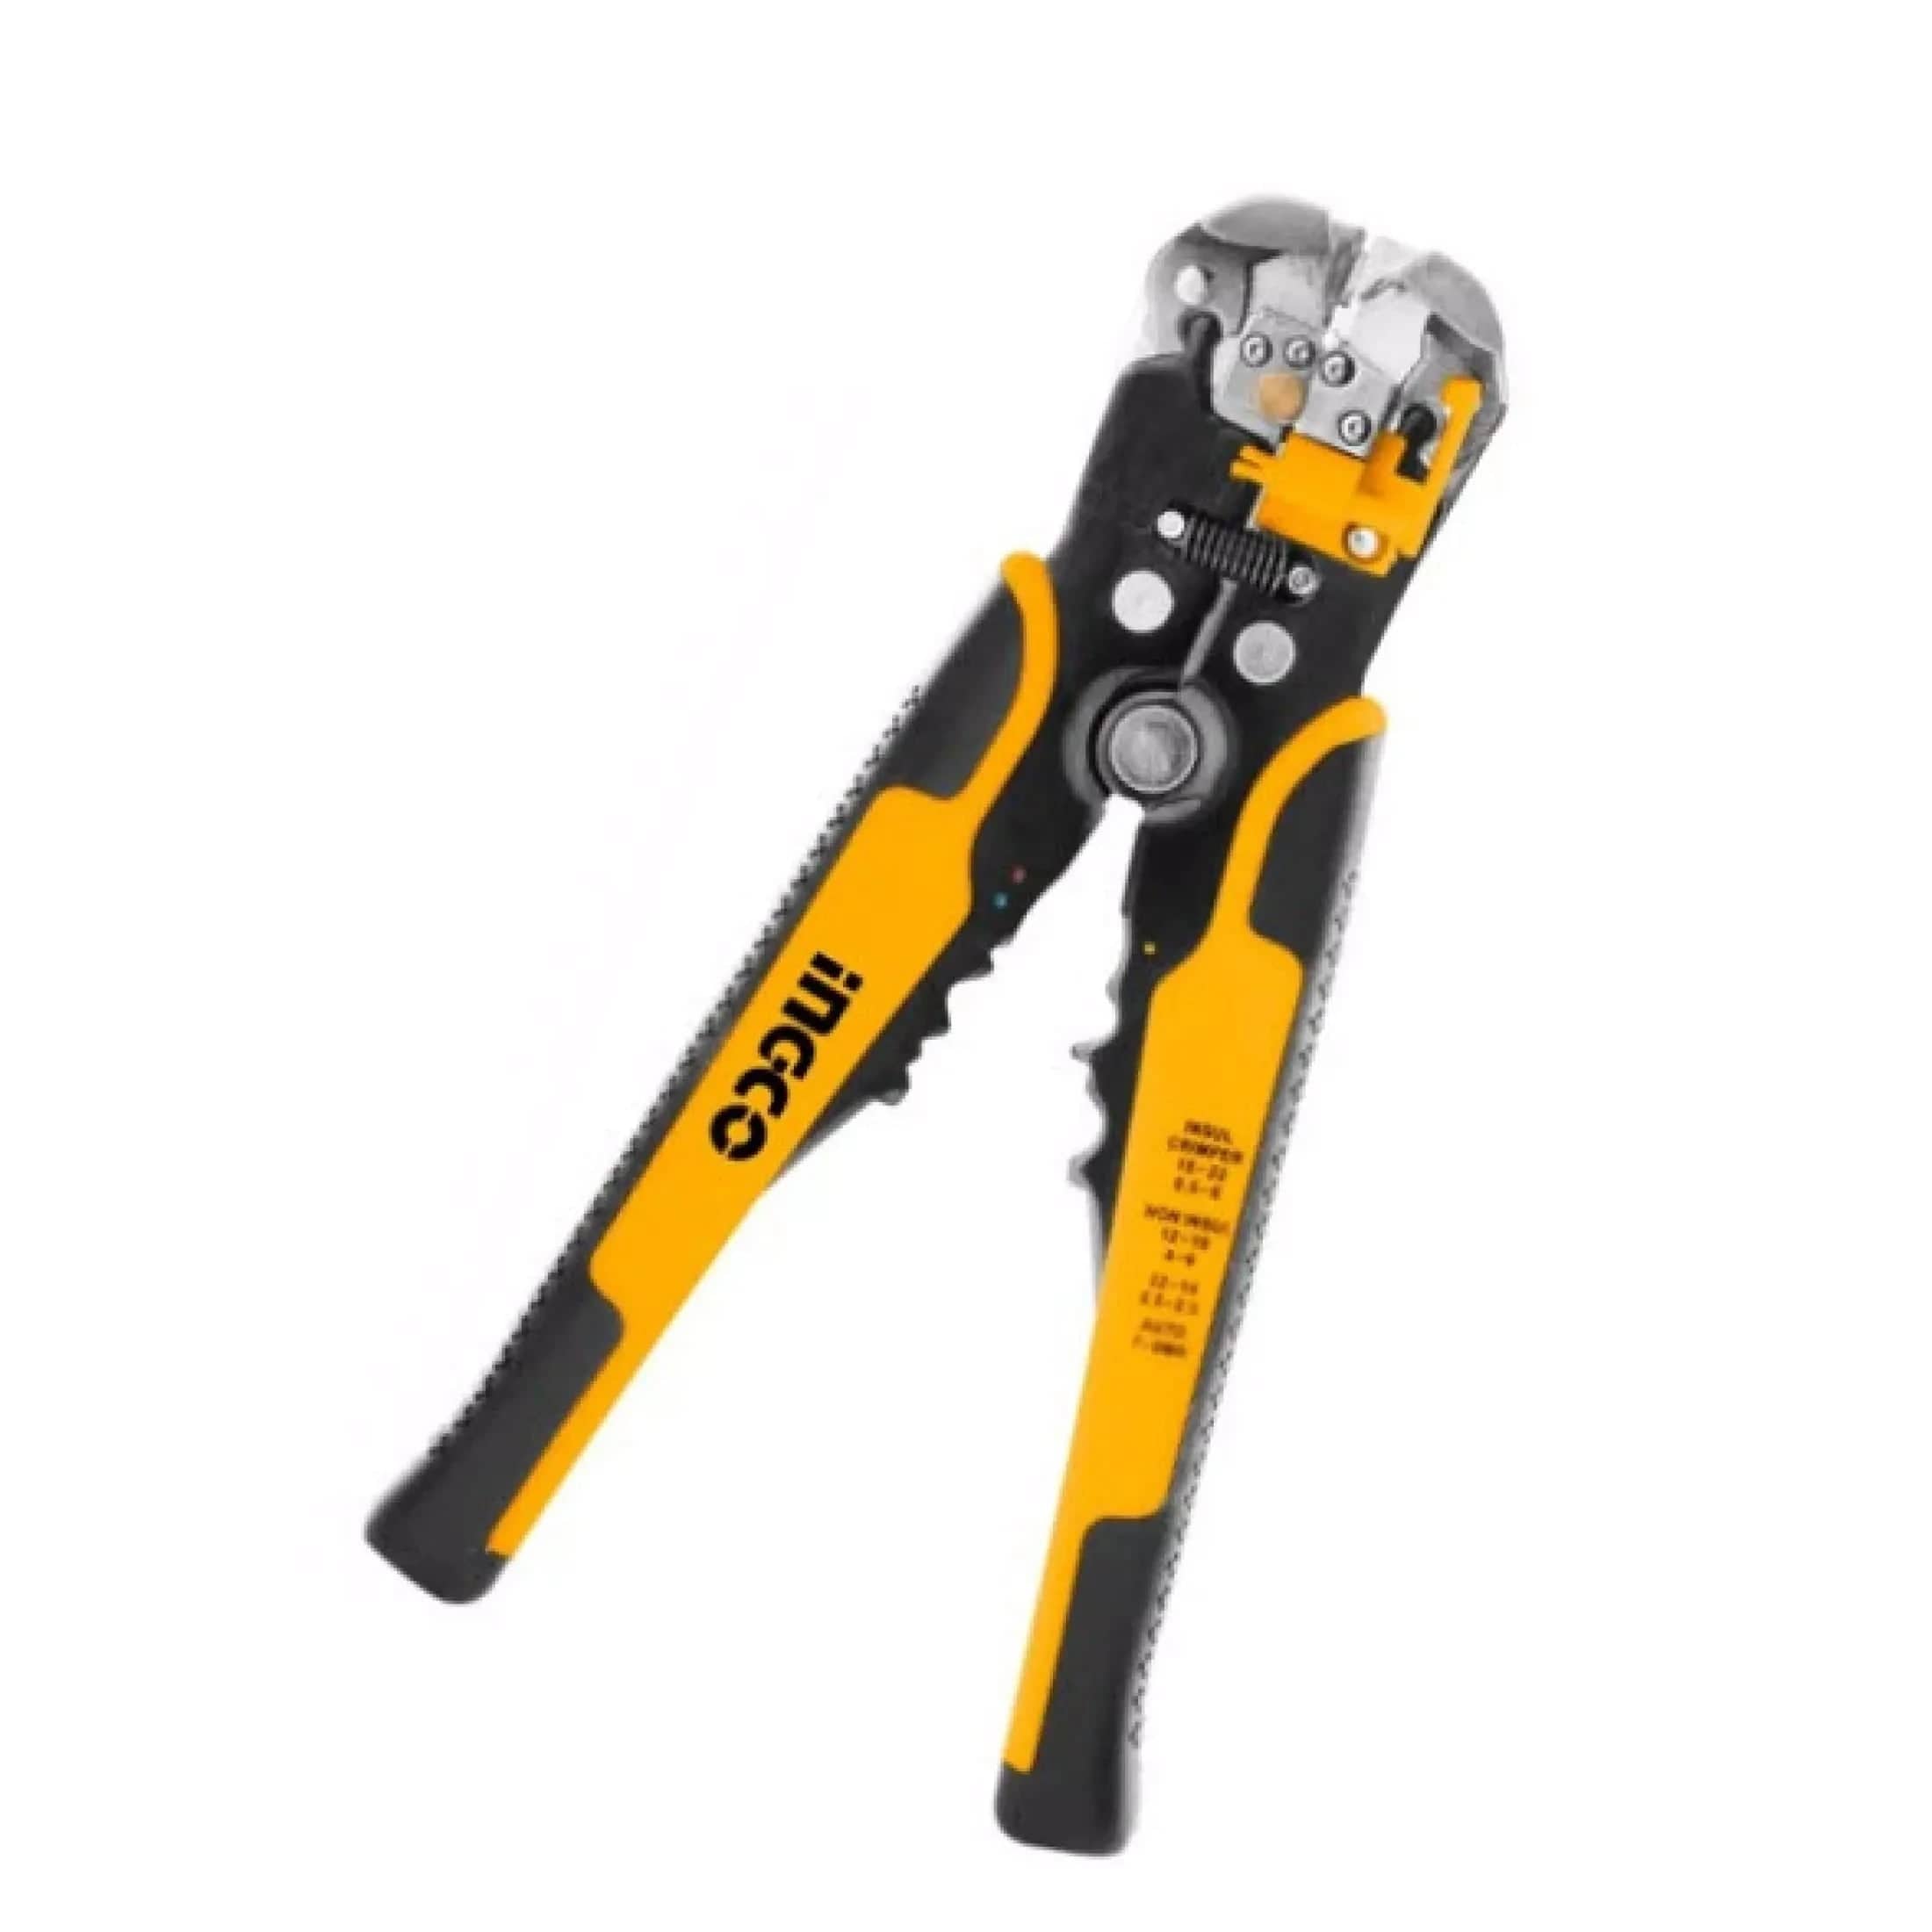 Ingco Intelligent Voltage-Detecting Stripper - HWSP102429 | Supply Master | Accra, Ghana Hand Saws & Cutting Tools Buy Tools hardware Building materials